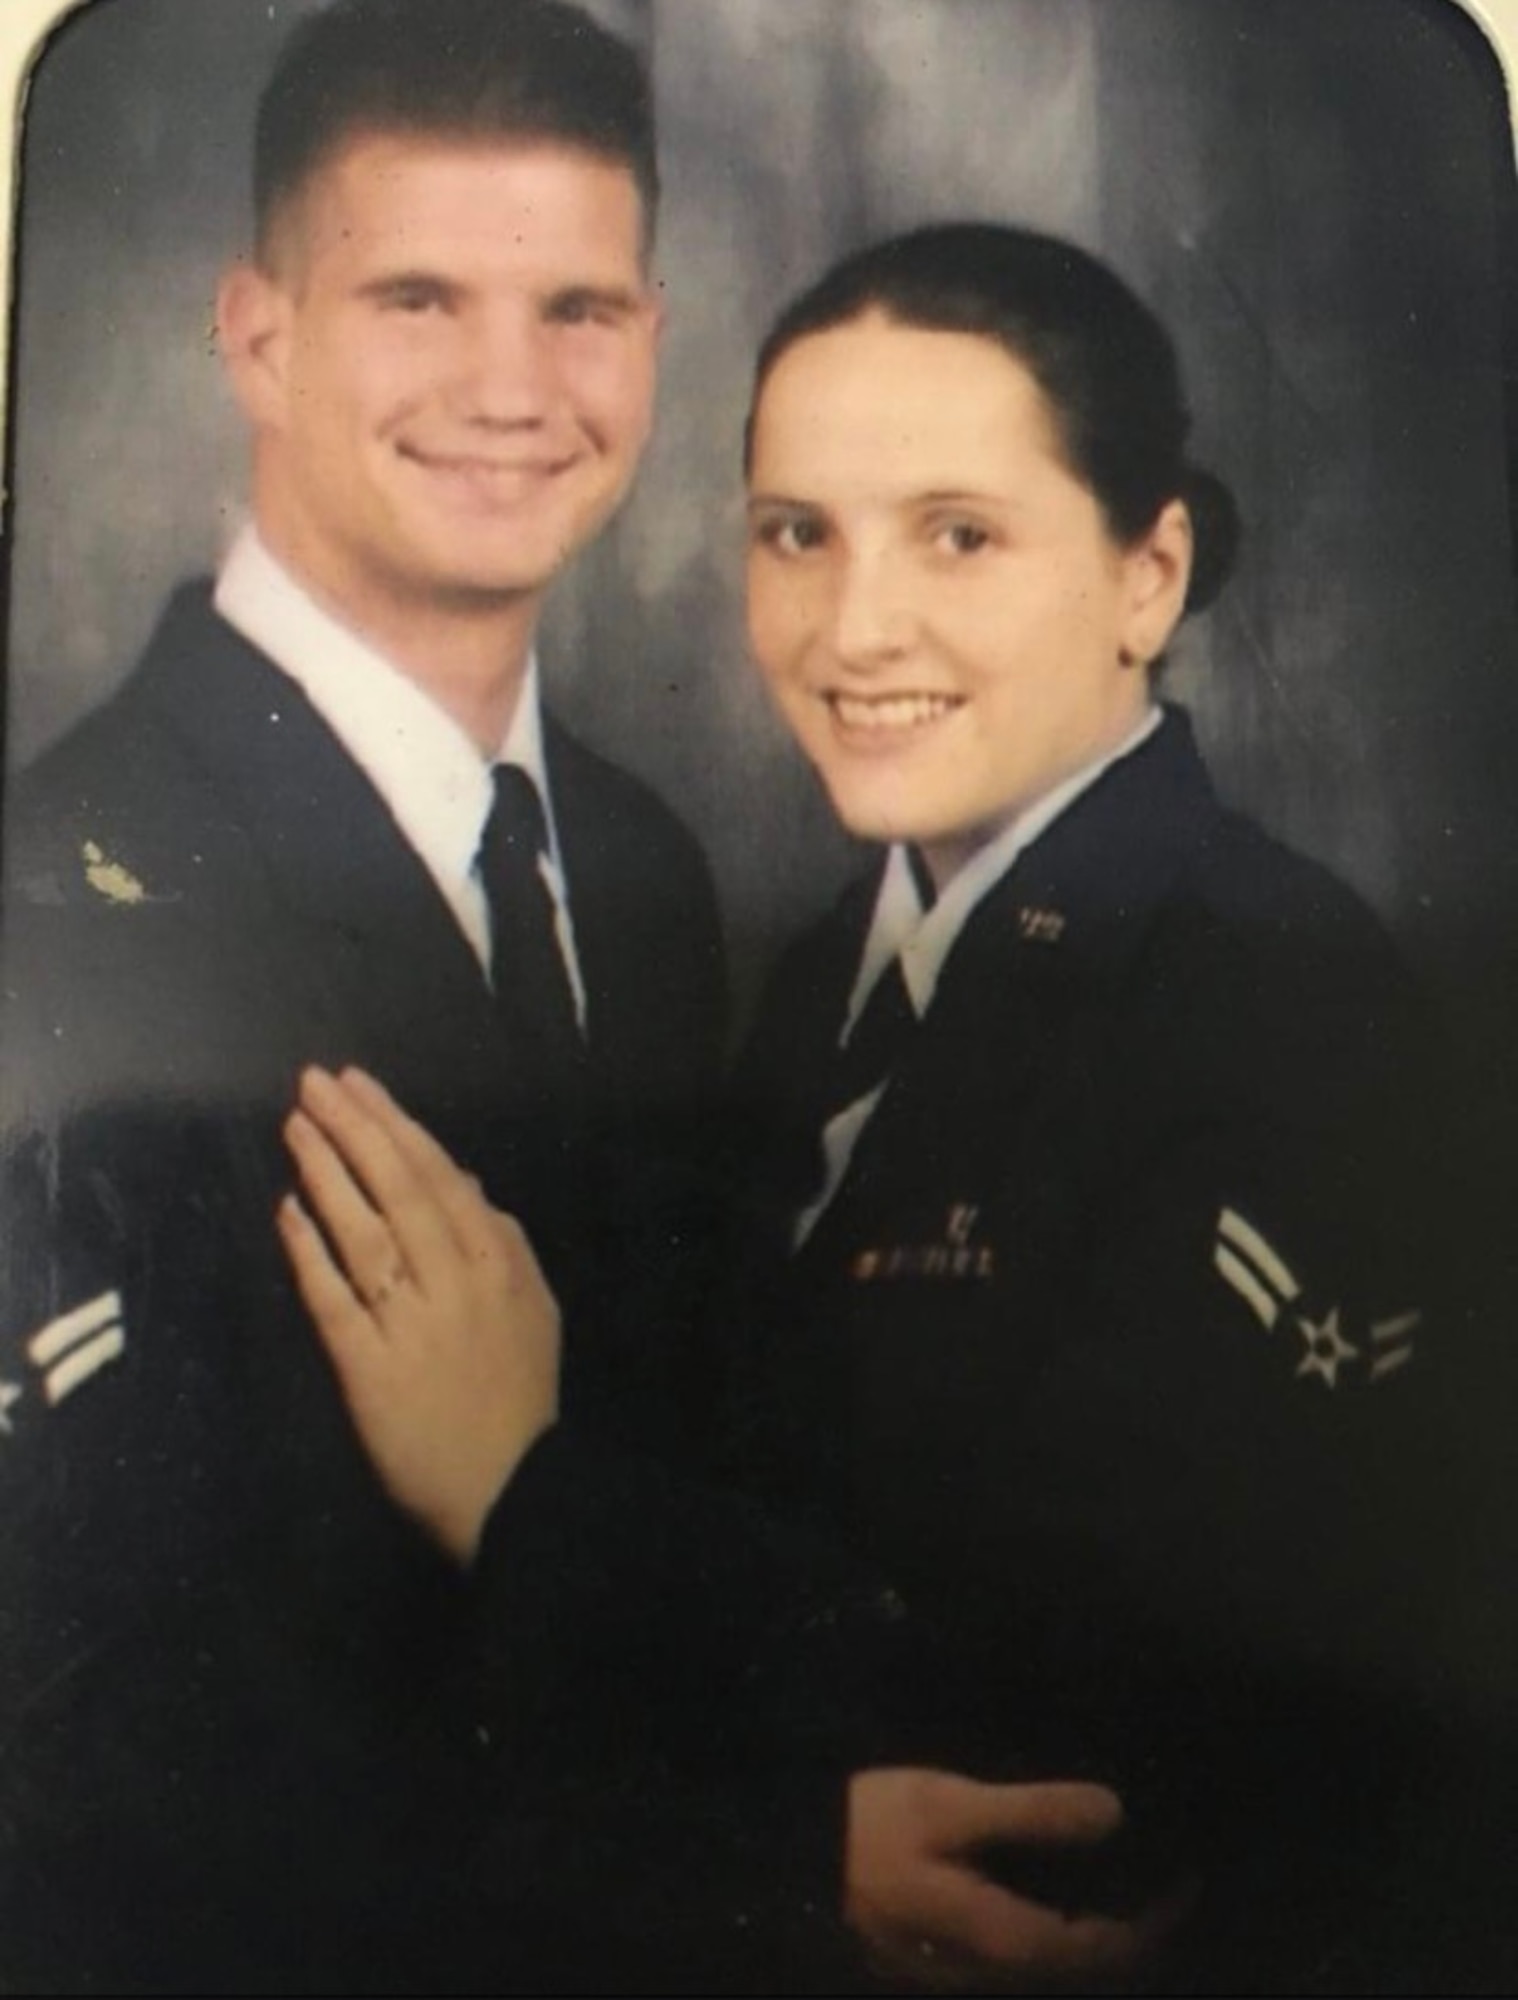 Then Airman Brian Leiter and Airman Trena Leiter pose in their service dress at Whiteman AFB in 1999, a few years after enlisting in the Air Force. At the time, Airman Brian Leiter was a crew chief with the 442d Fighter Wing and Airman Trena Leiter was an active duty medical technician with the 509th Bomb Wing.